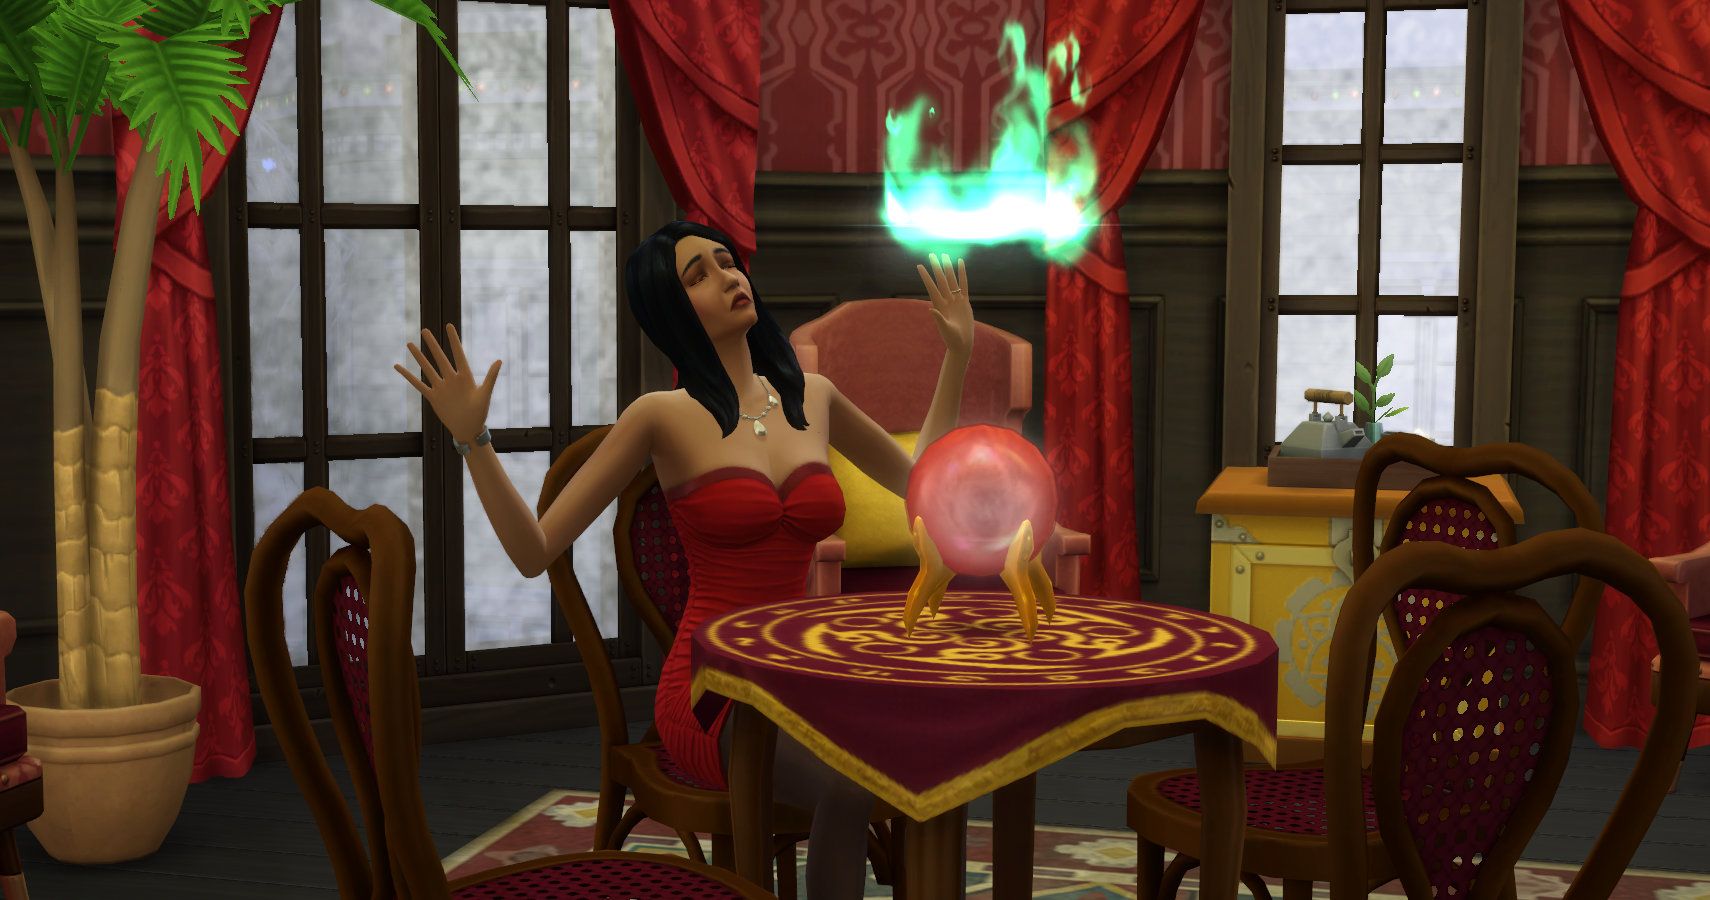 Bella Goth using a seance table in her home.